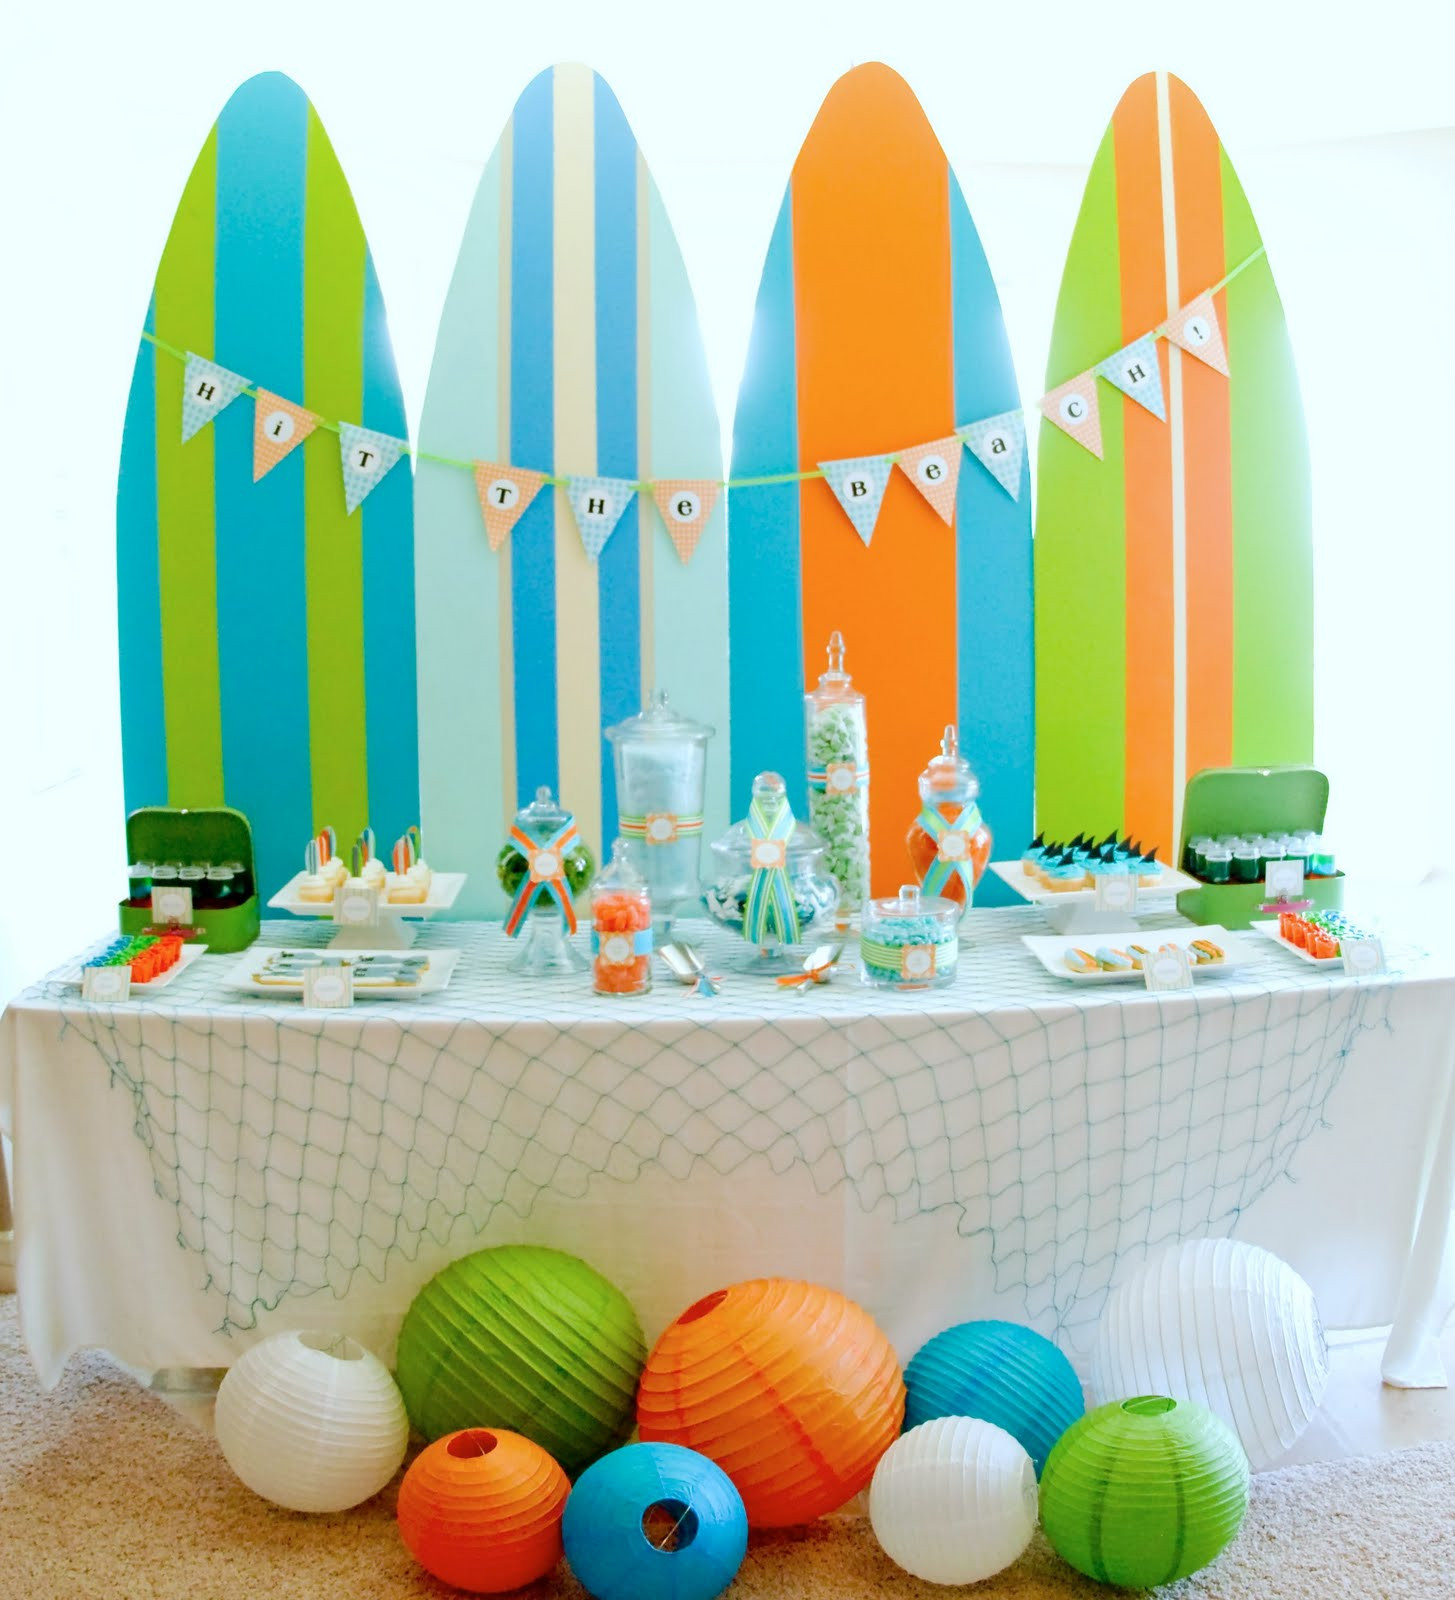 Boys Pool Party Ideas
 Kara s Party Ideas Surf s Up Summer Pool Party